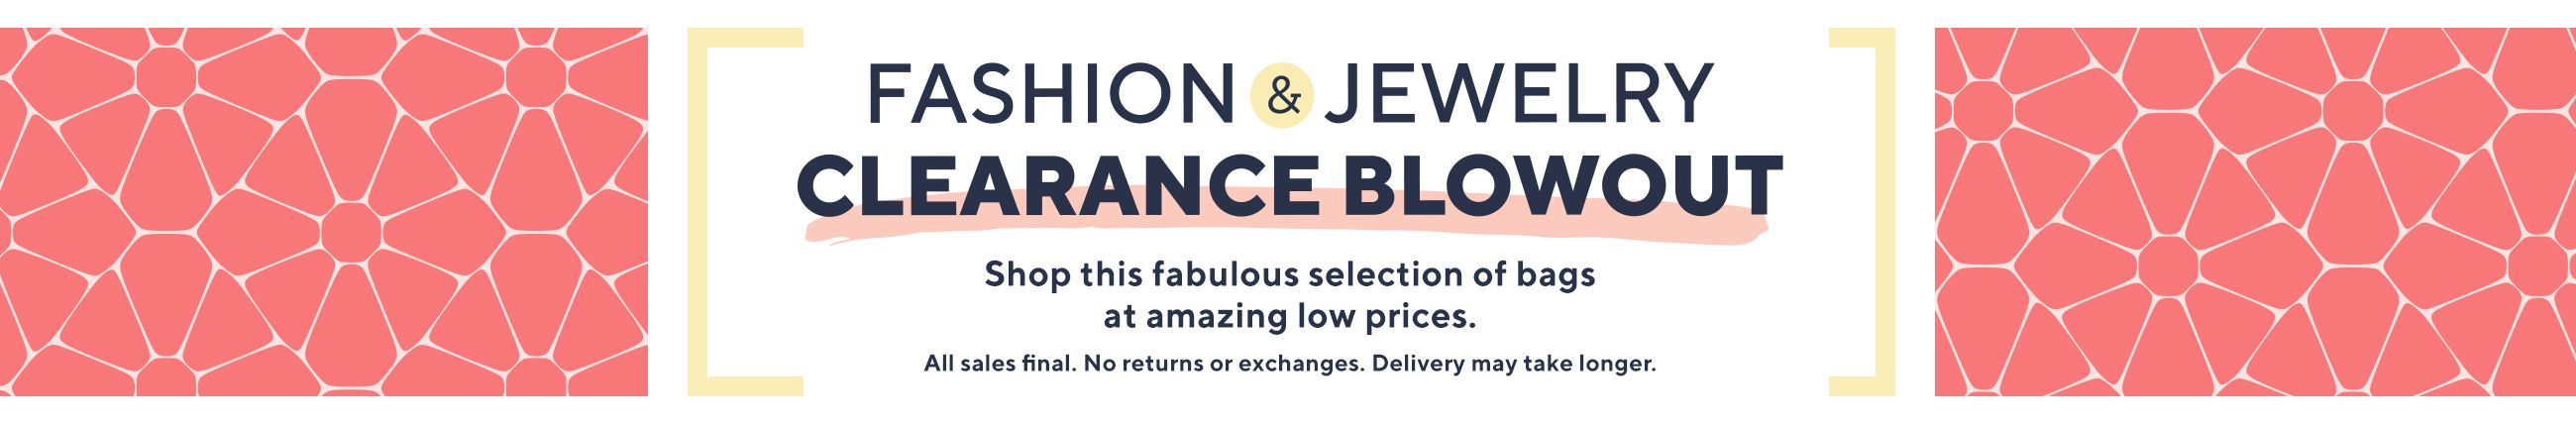 Fashion & Jewelry Clearance Blowout - Shop this fabulous selection of bags at amazing low prices.  All sales final. No returns or exchanges. Delivery may take longer.